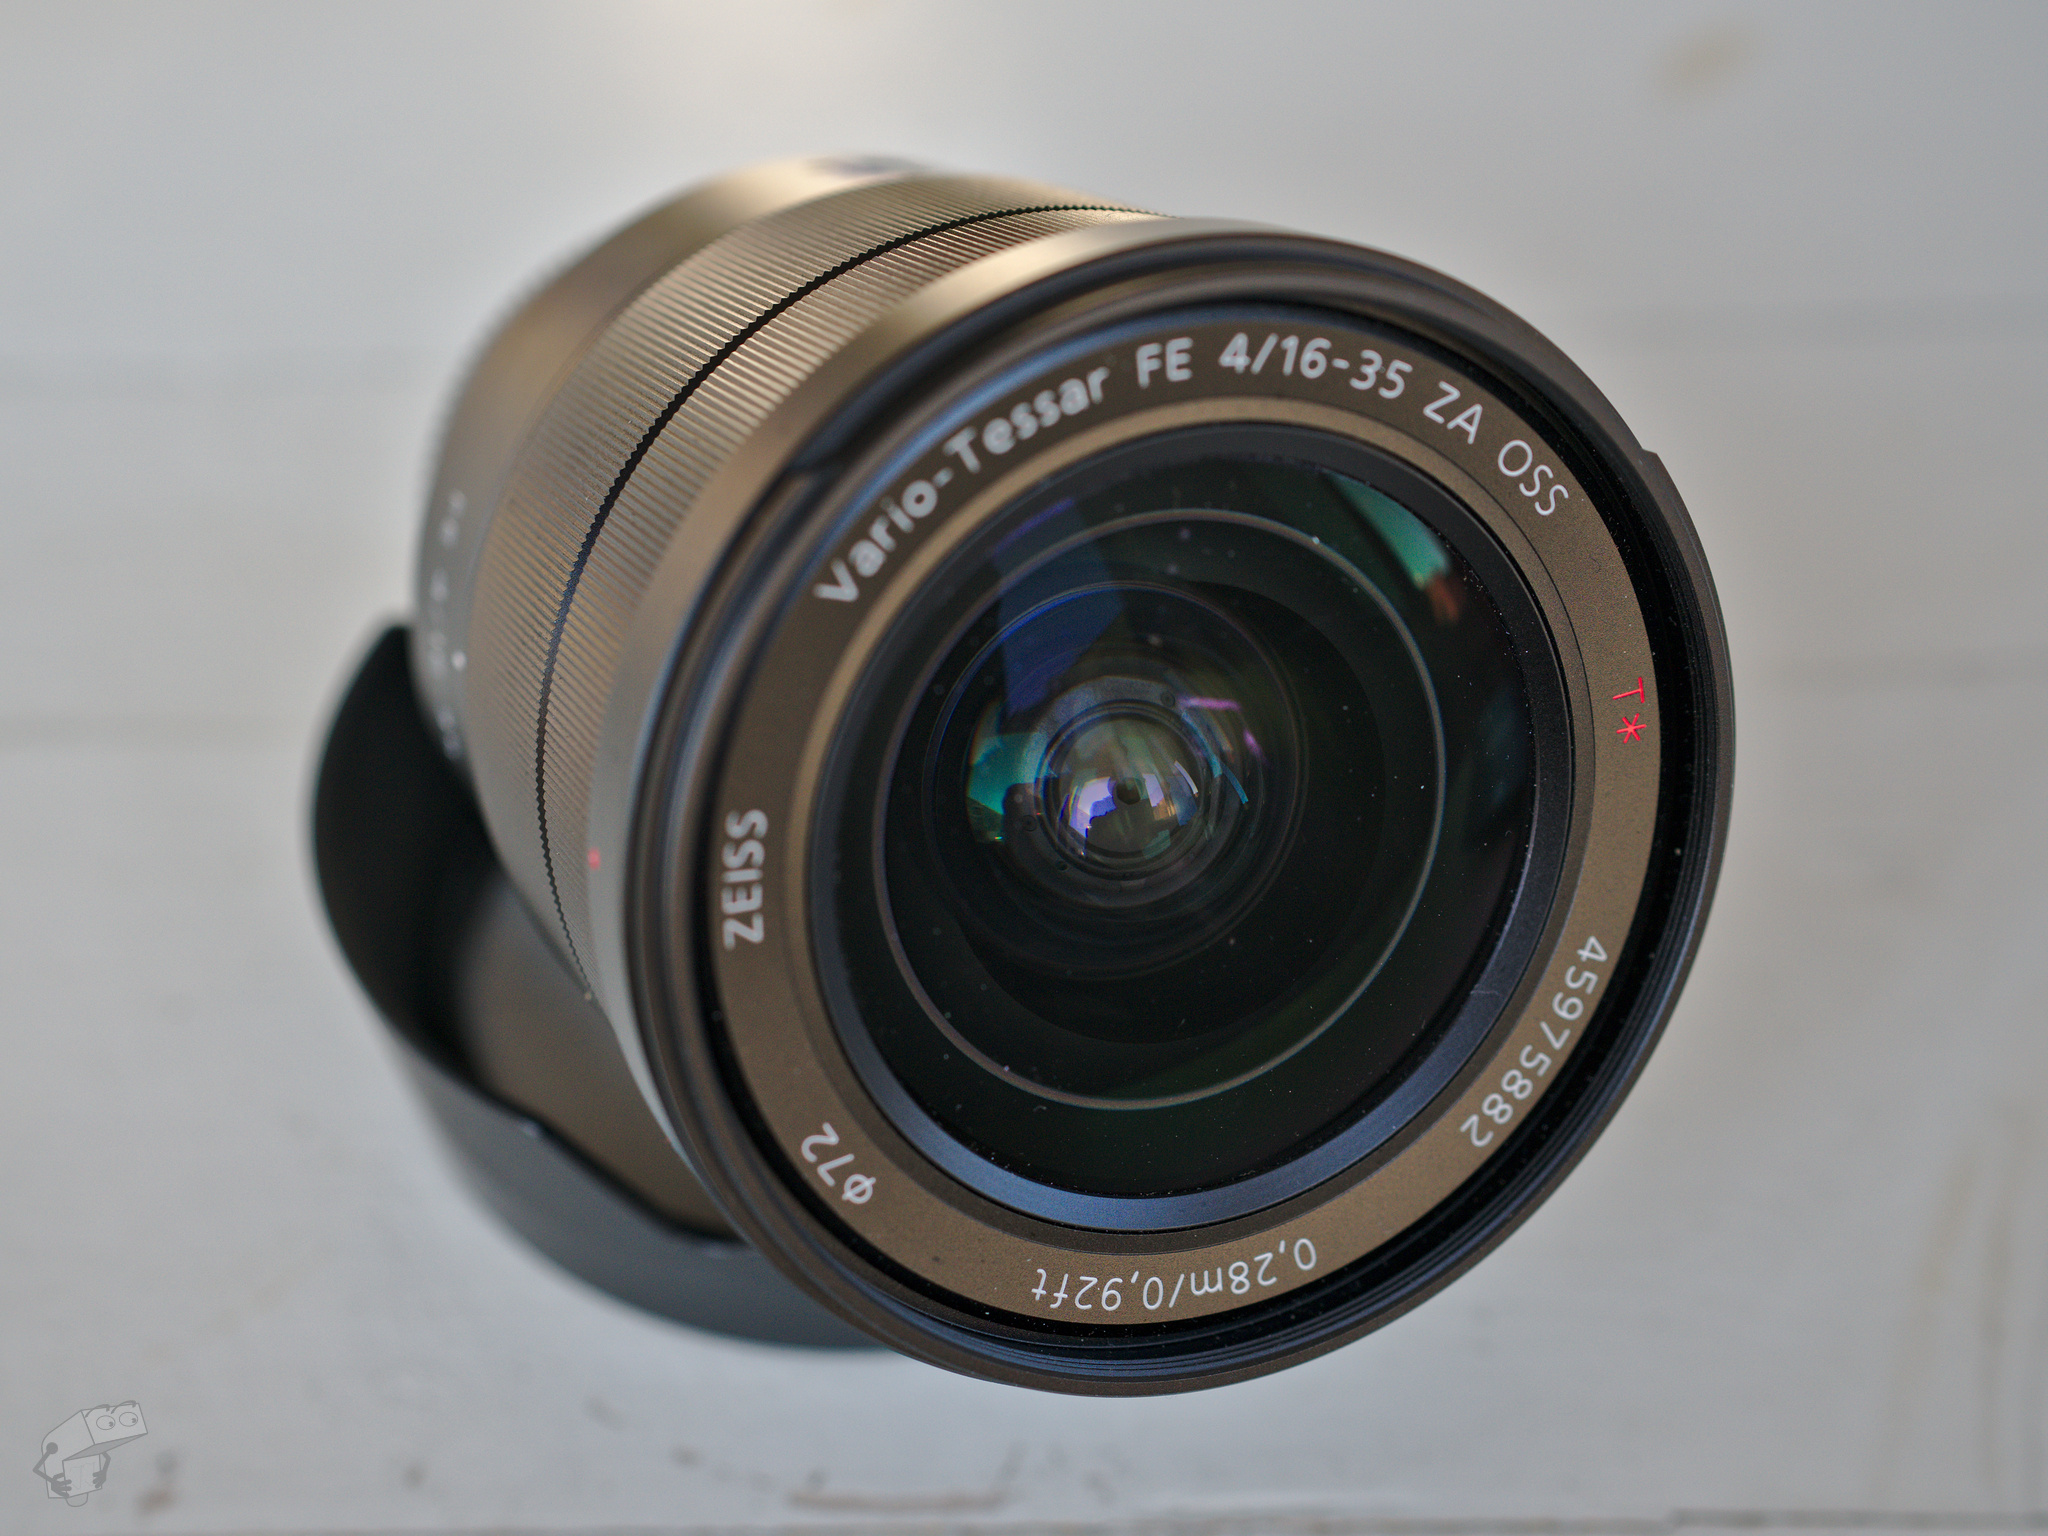 A wide-angle zoom lens for Sony FE full-frame system.